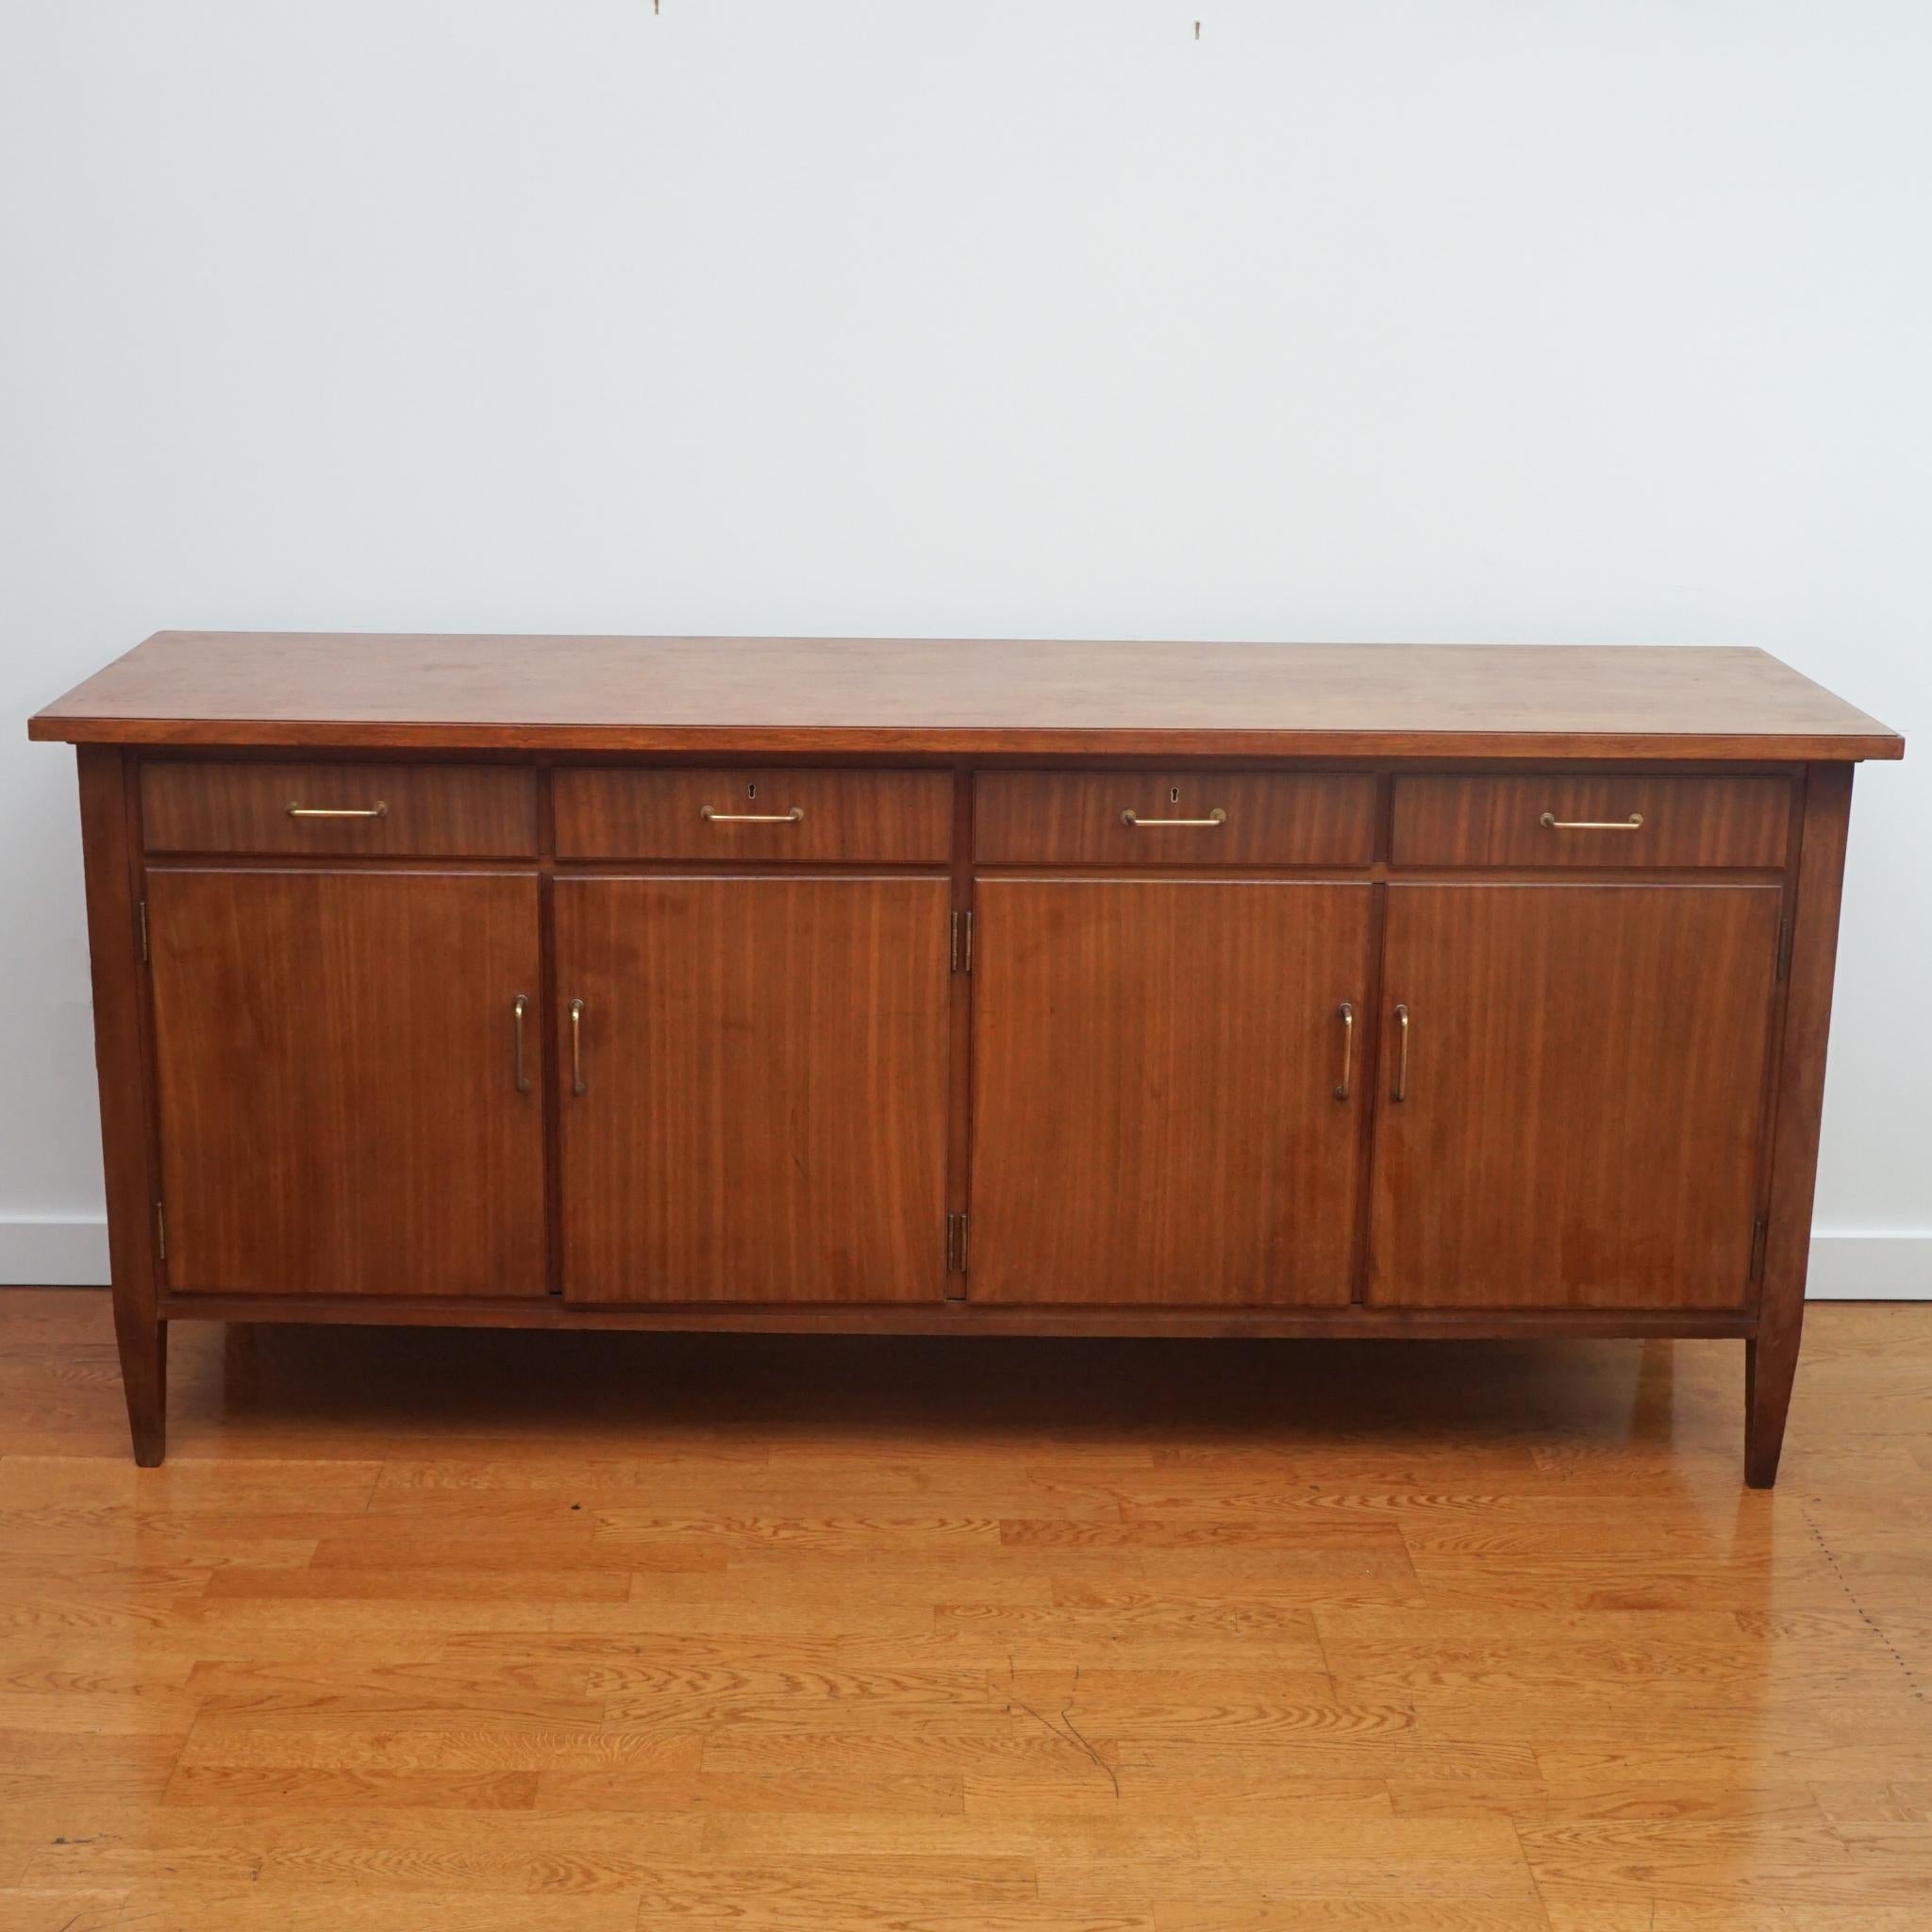 The rich wood tone and classic lines of this English sideboard from the 1960s makes it a highly desirable piece today. Featuring four cabinet doors and four top drawers, the sideboard can be used anywhere decorative storage is needed—dining room,